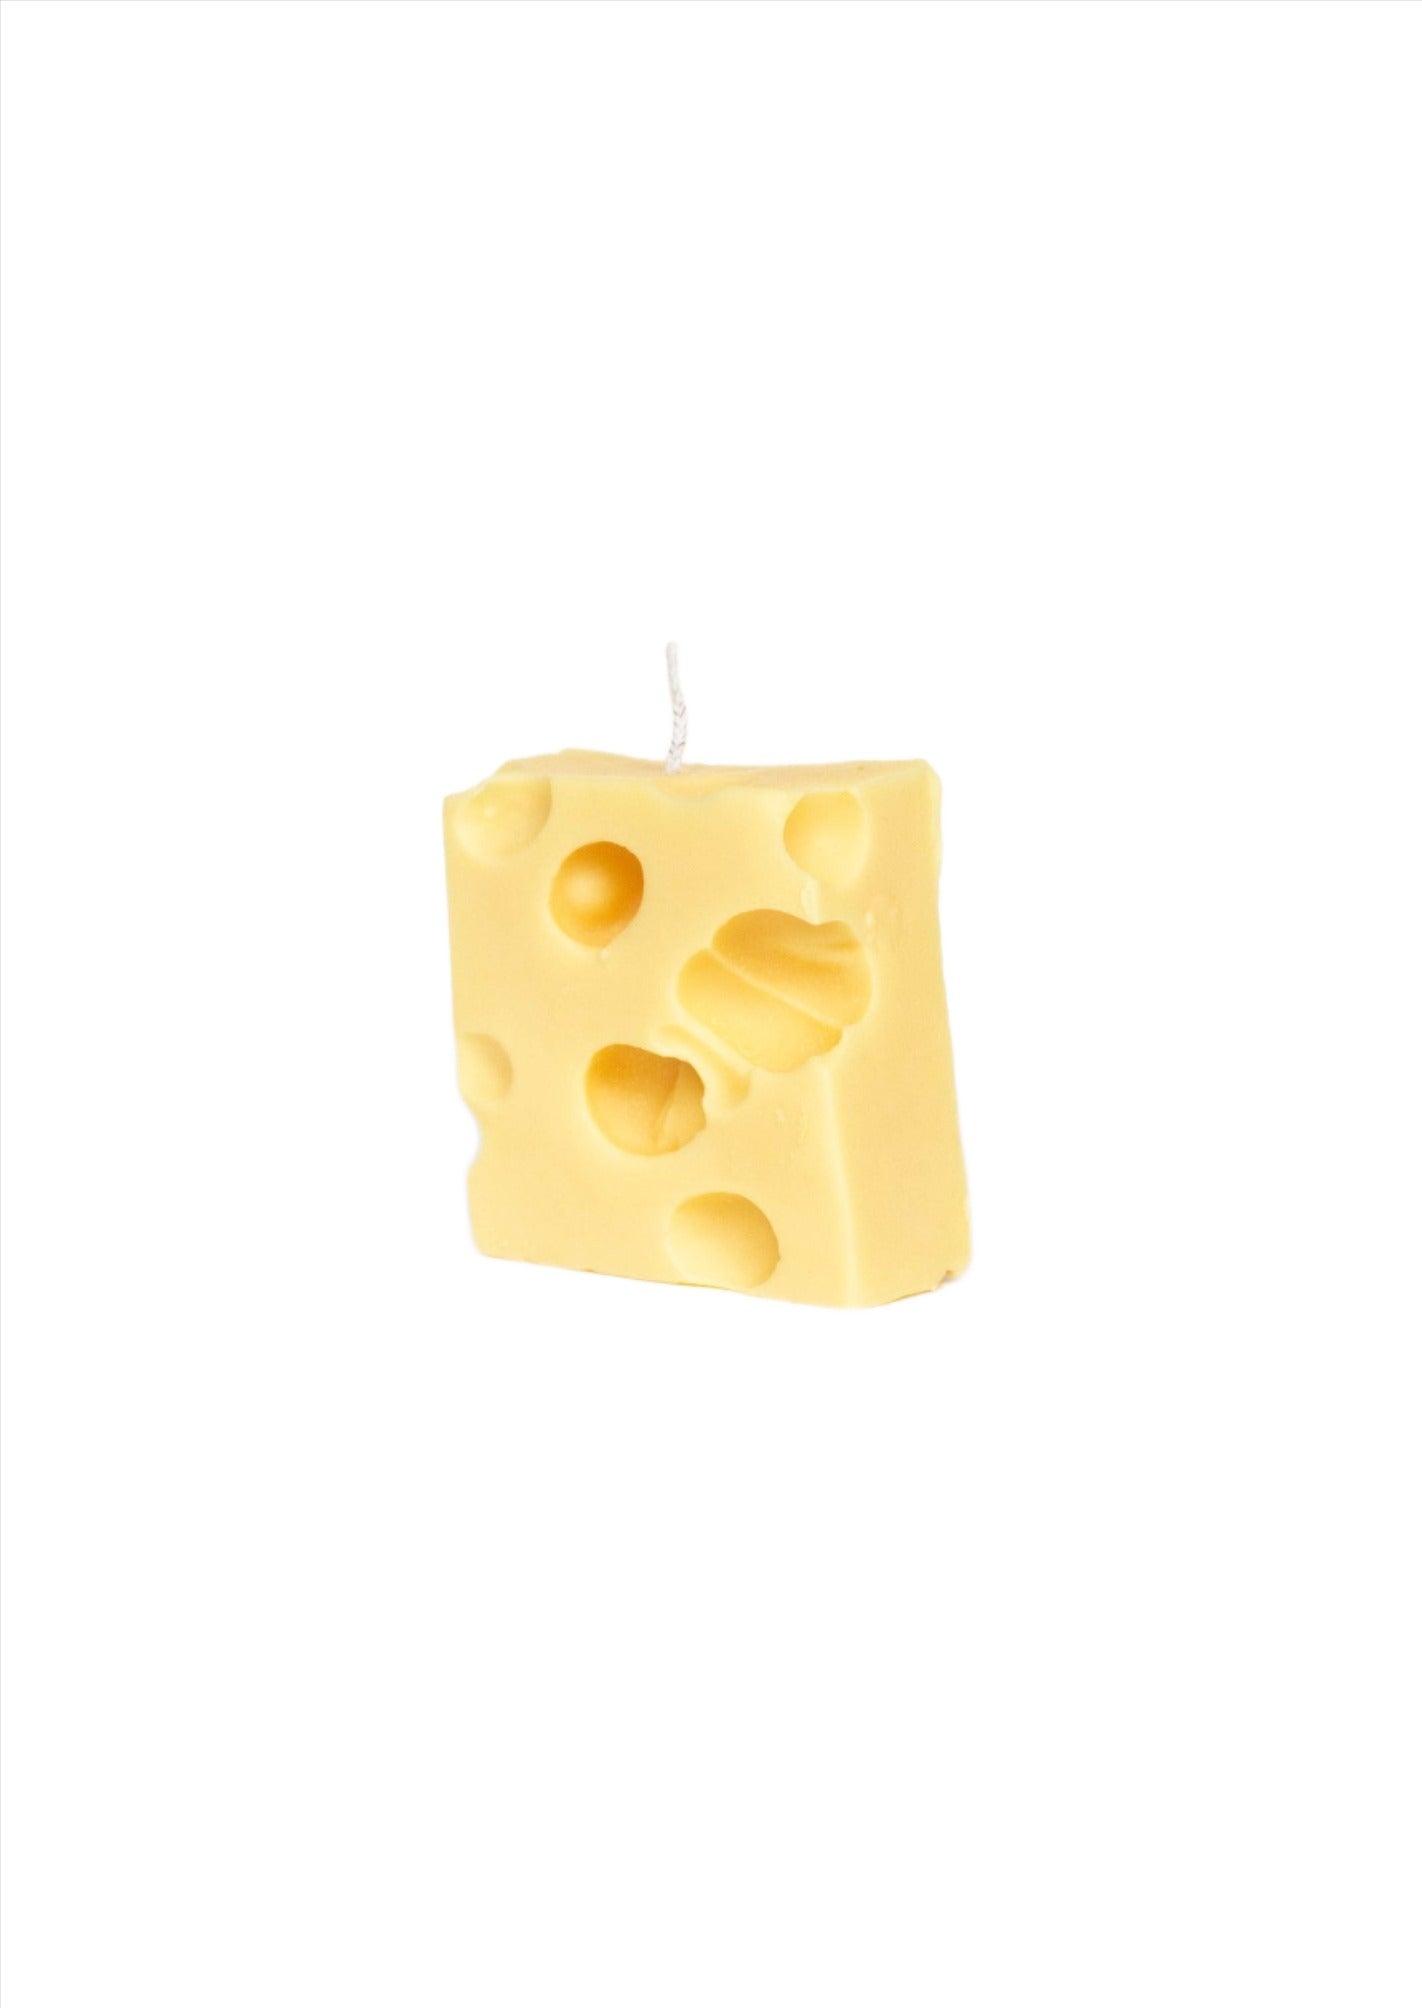 Gruyere Cheese // Candle